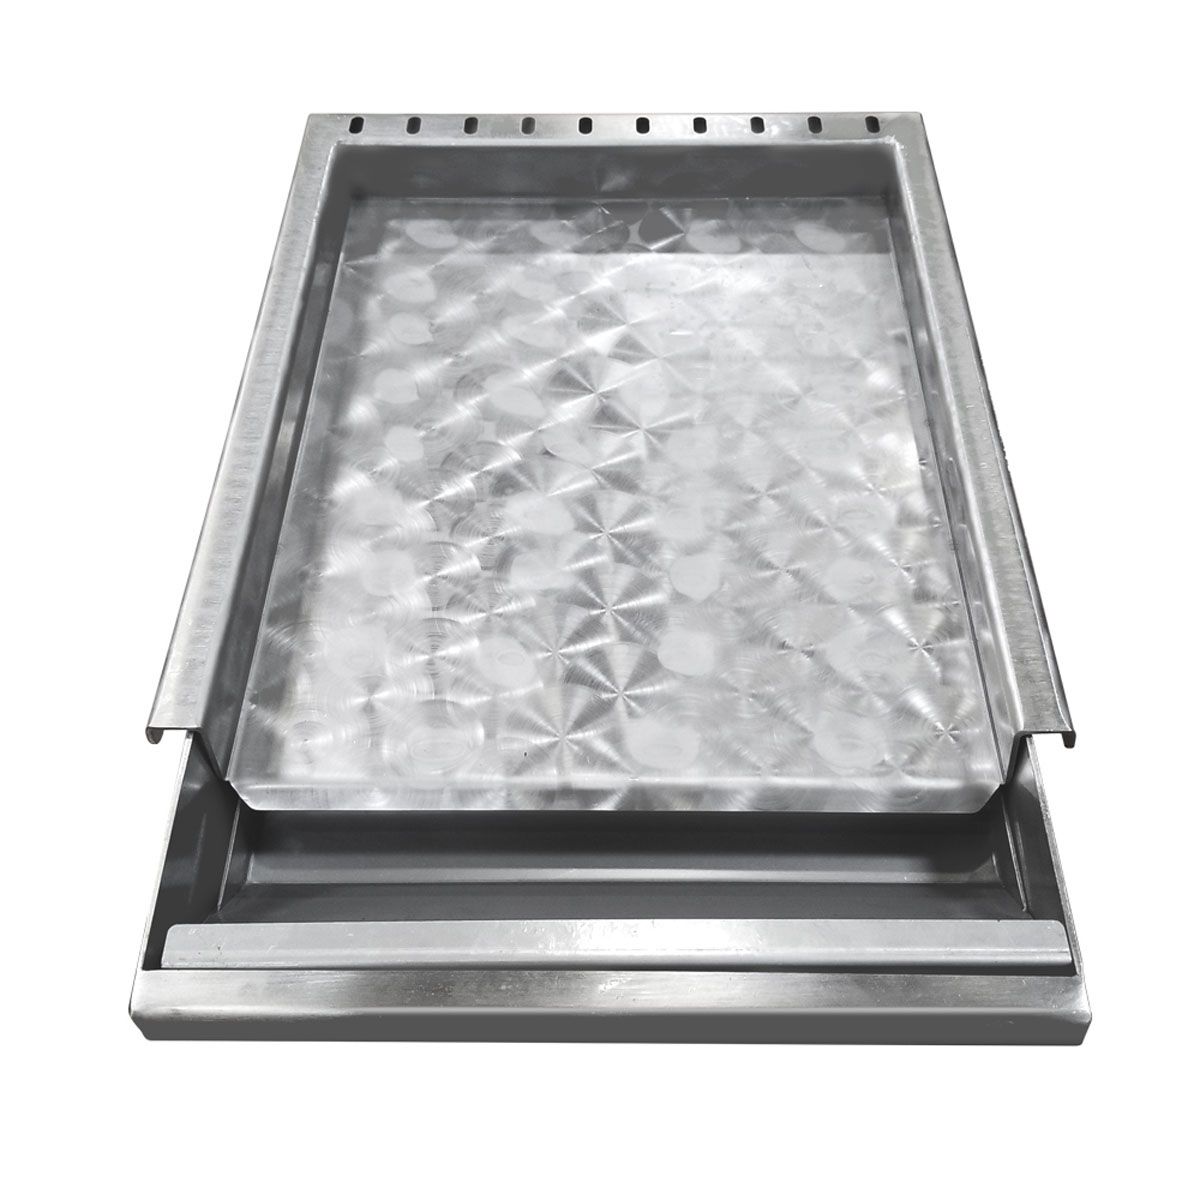 Buy Stainless Steel Food Dehydrator with Large Capacity 6 Trays at  Barbeques Galore.